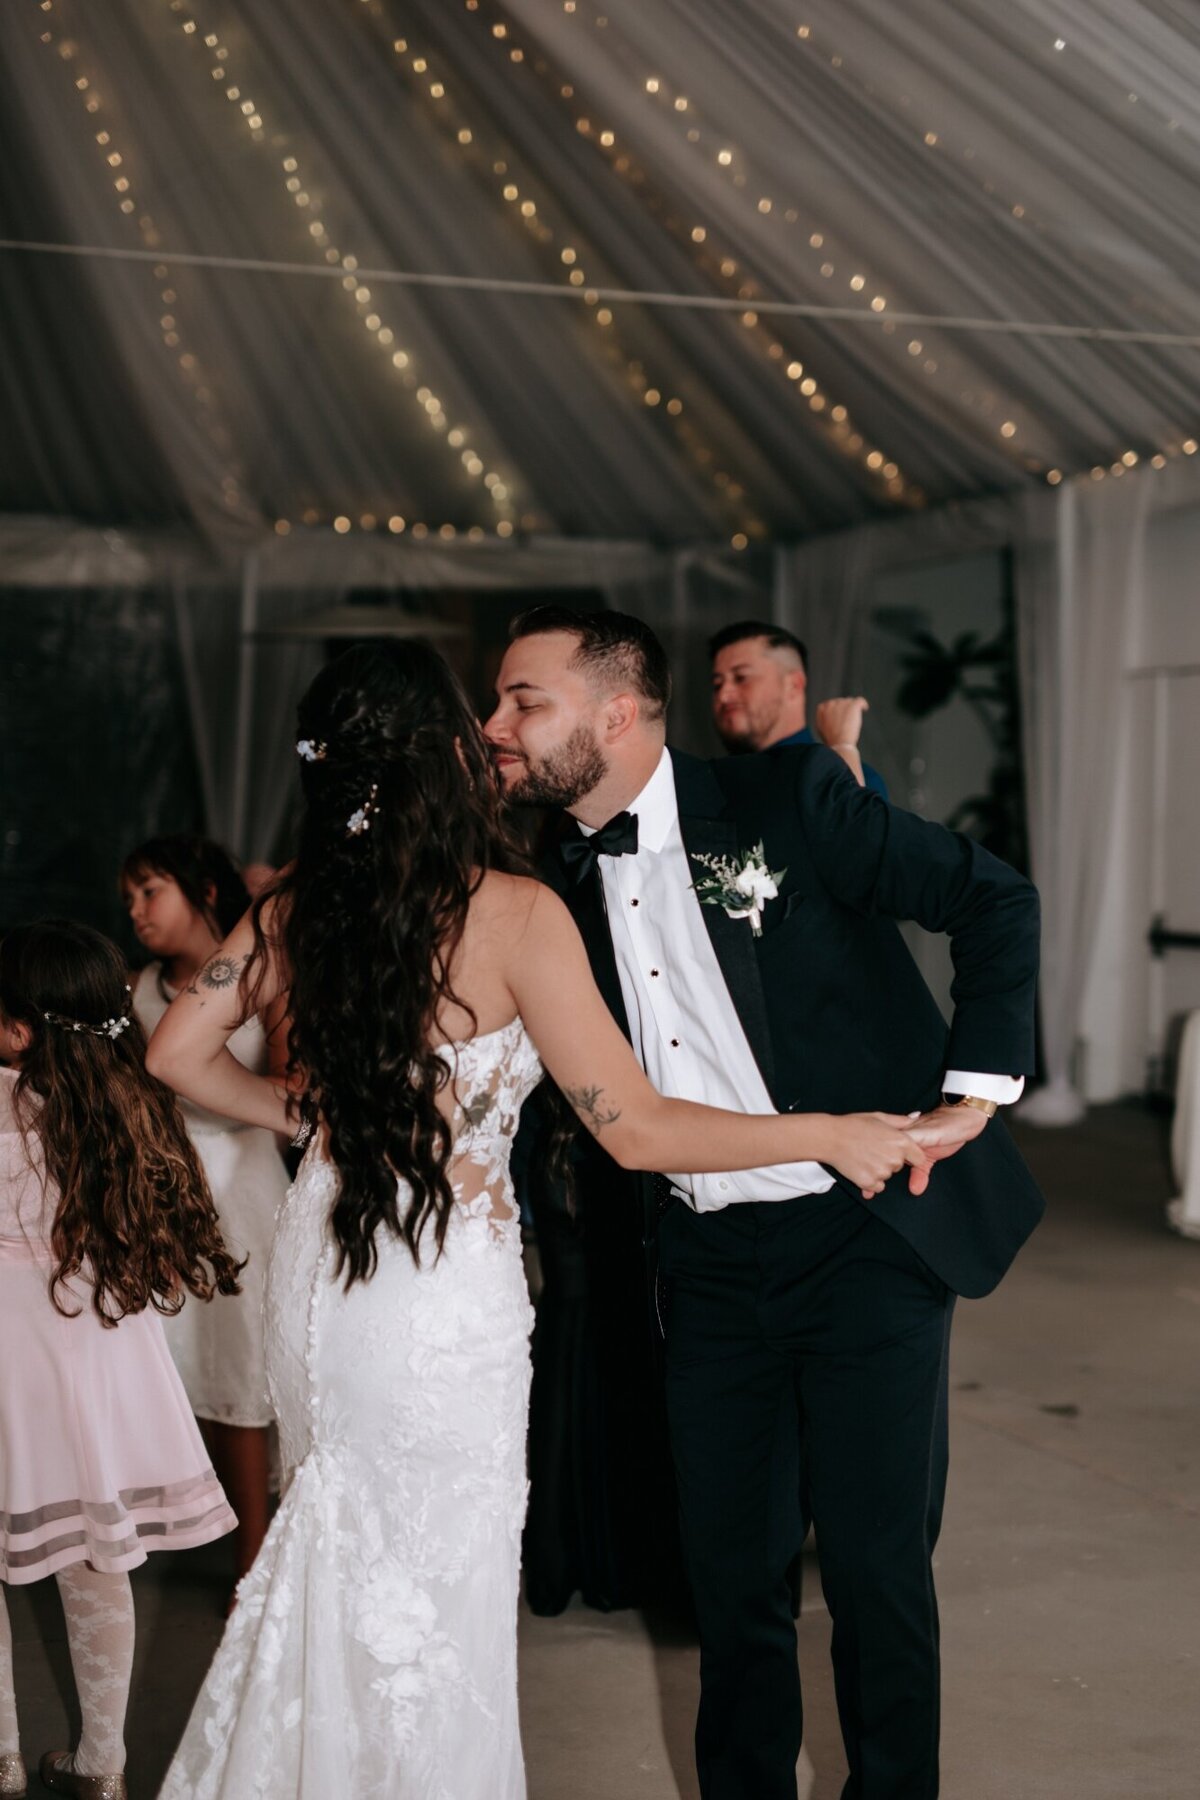 Groom kissing the bride on the cheek while dancing during reception.